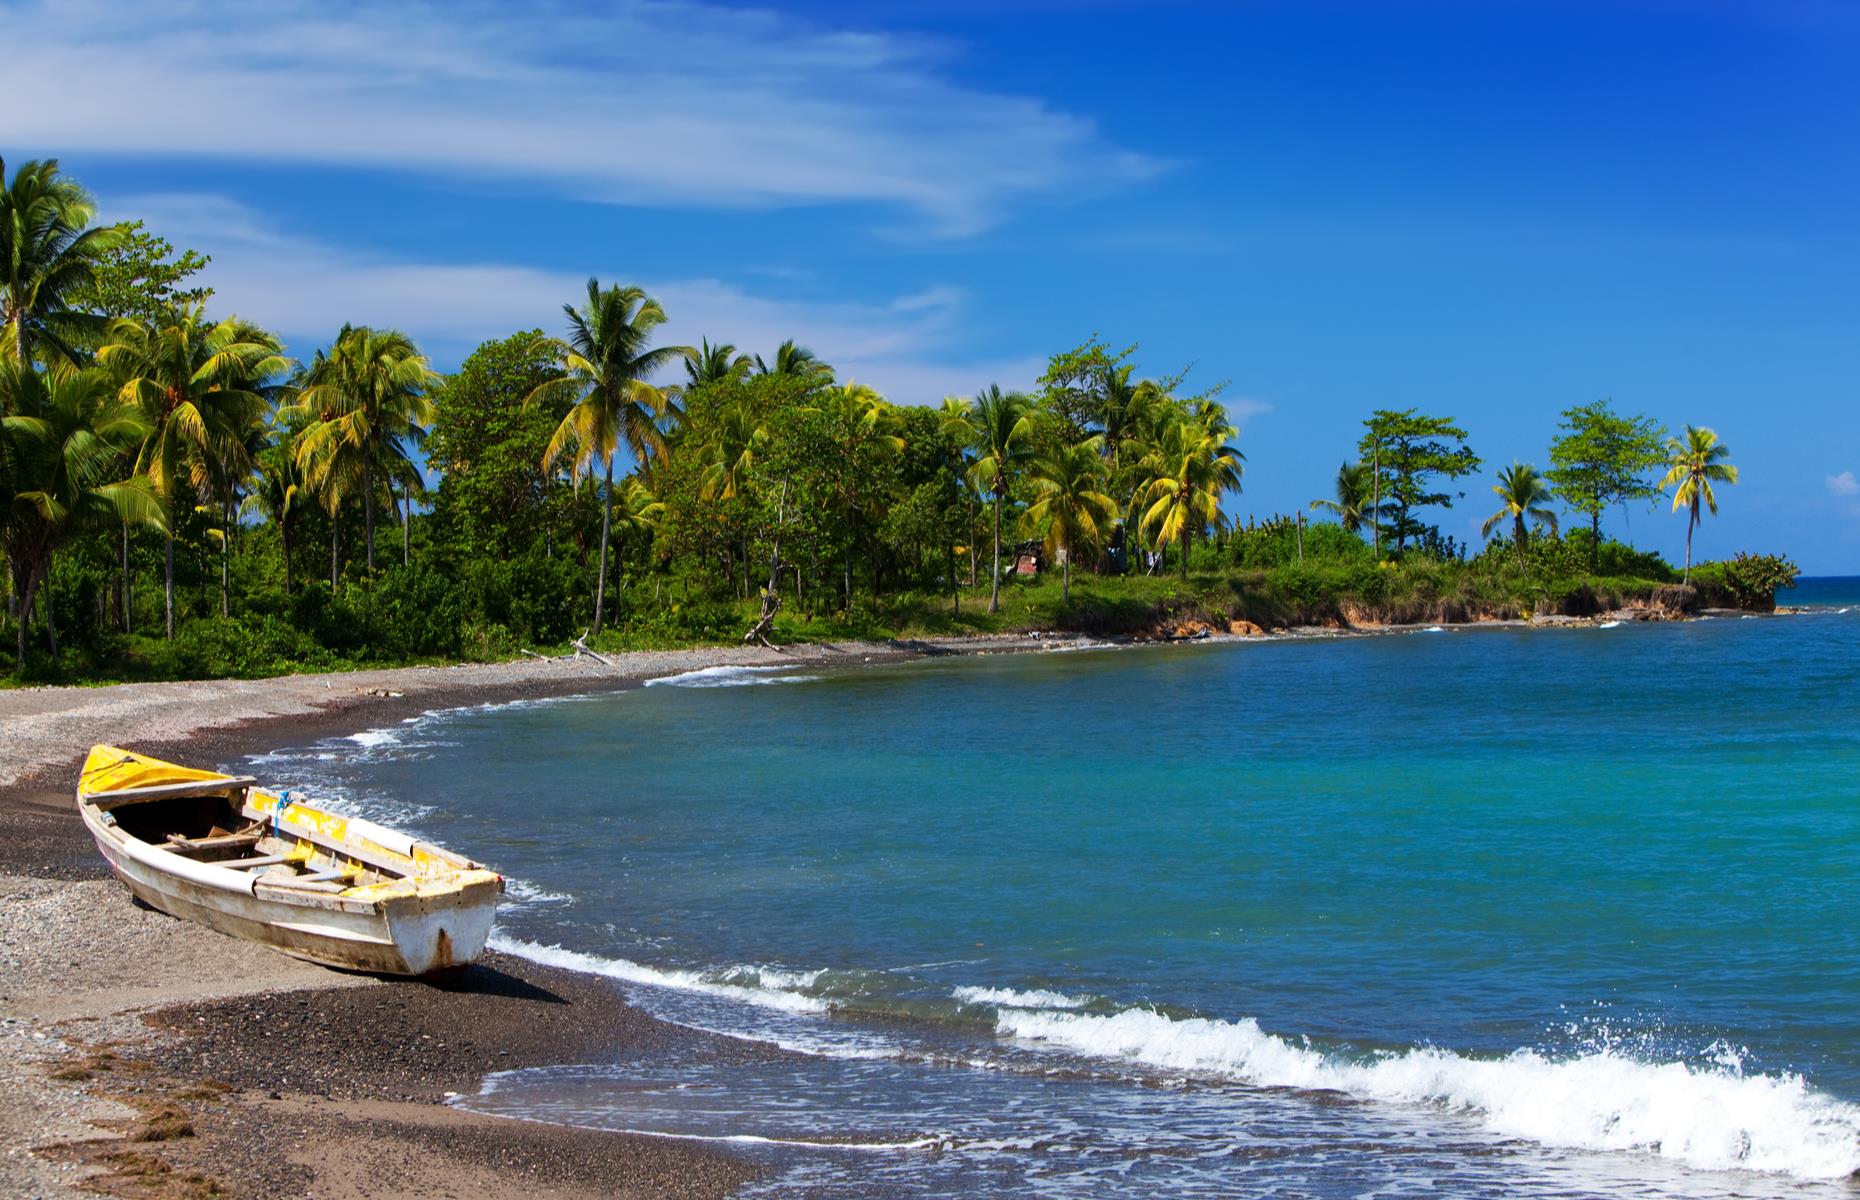 <p>Jamaica has long been a favored location for the movie franchise. It’s in the DNA, after all, as the Caribbean island was very close to creator Ian Fleming’s heart – he wrote all 14 books at his home GoldenEye in Oracabessa on the northeast coast. His tropical retreat is now <a href="https://www.theflemingvilla.com">an upscale resort where guests can stay in the author’s writing studio</a>. Laughing Waters Beach was the setting for arguably the most famous Bond scene ever, when Honey Ryder (Ursula Andress) emerges from the sea in the inaugural movie, <em>Dr No</em>. The secret agent has returned to the island many times since, including in 1973's <em>Live And Let Die</em>, where Jamaica doubled as the fictional San Monique.</p>